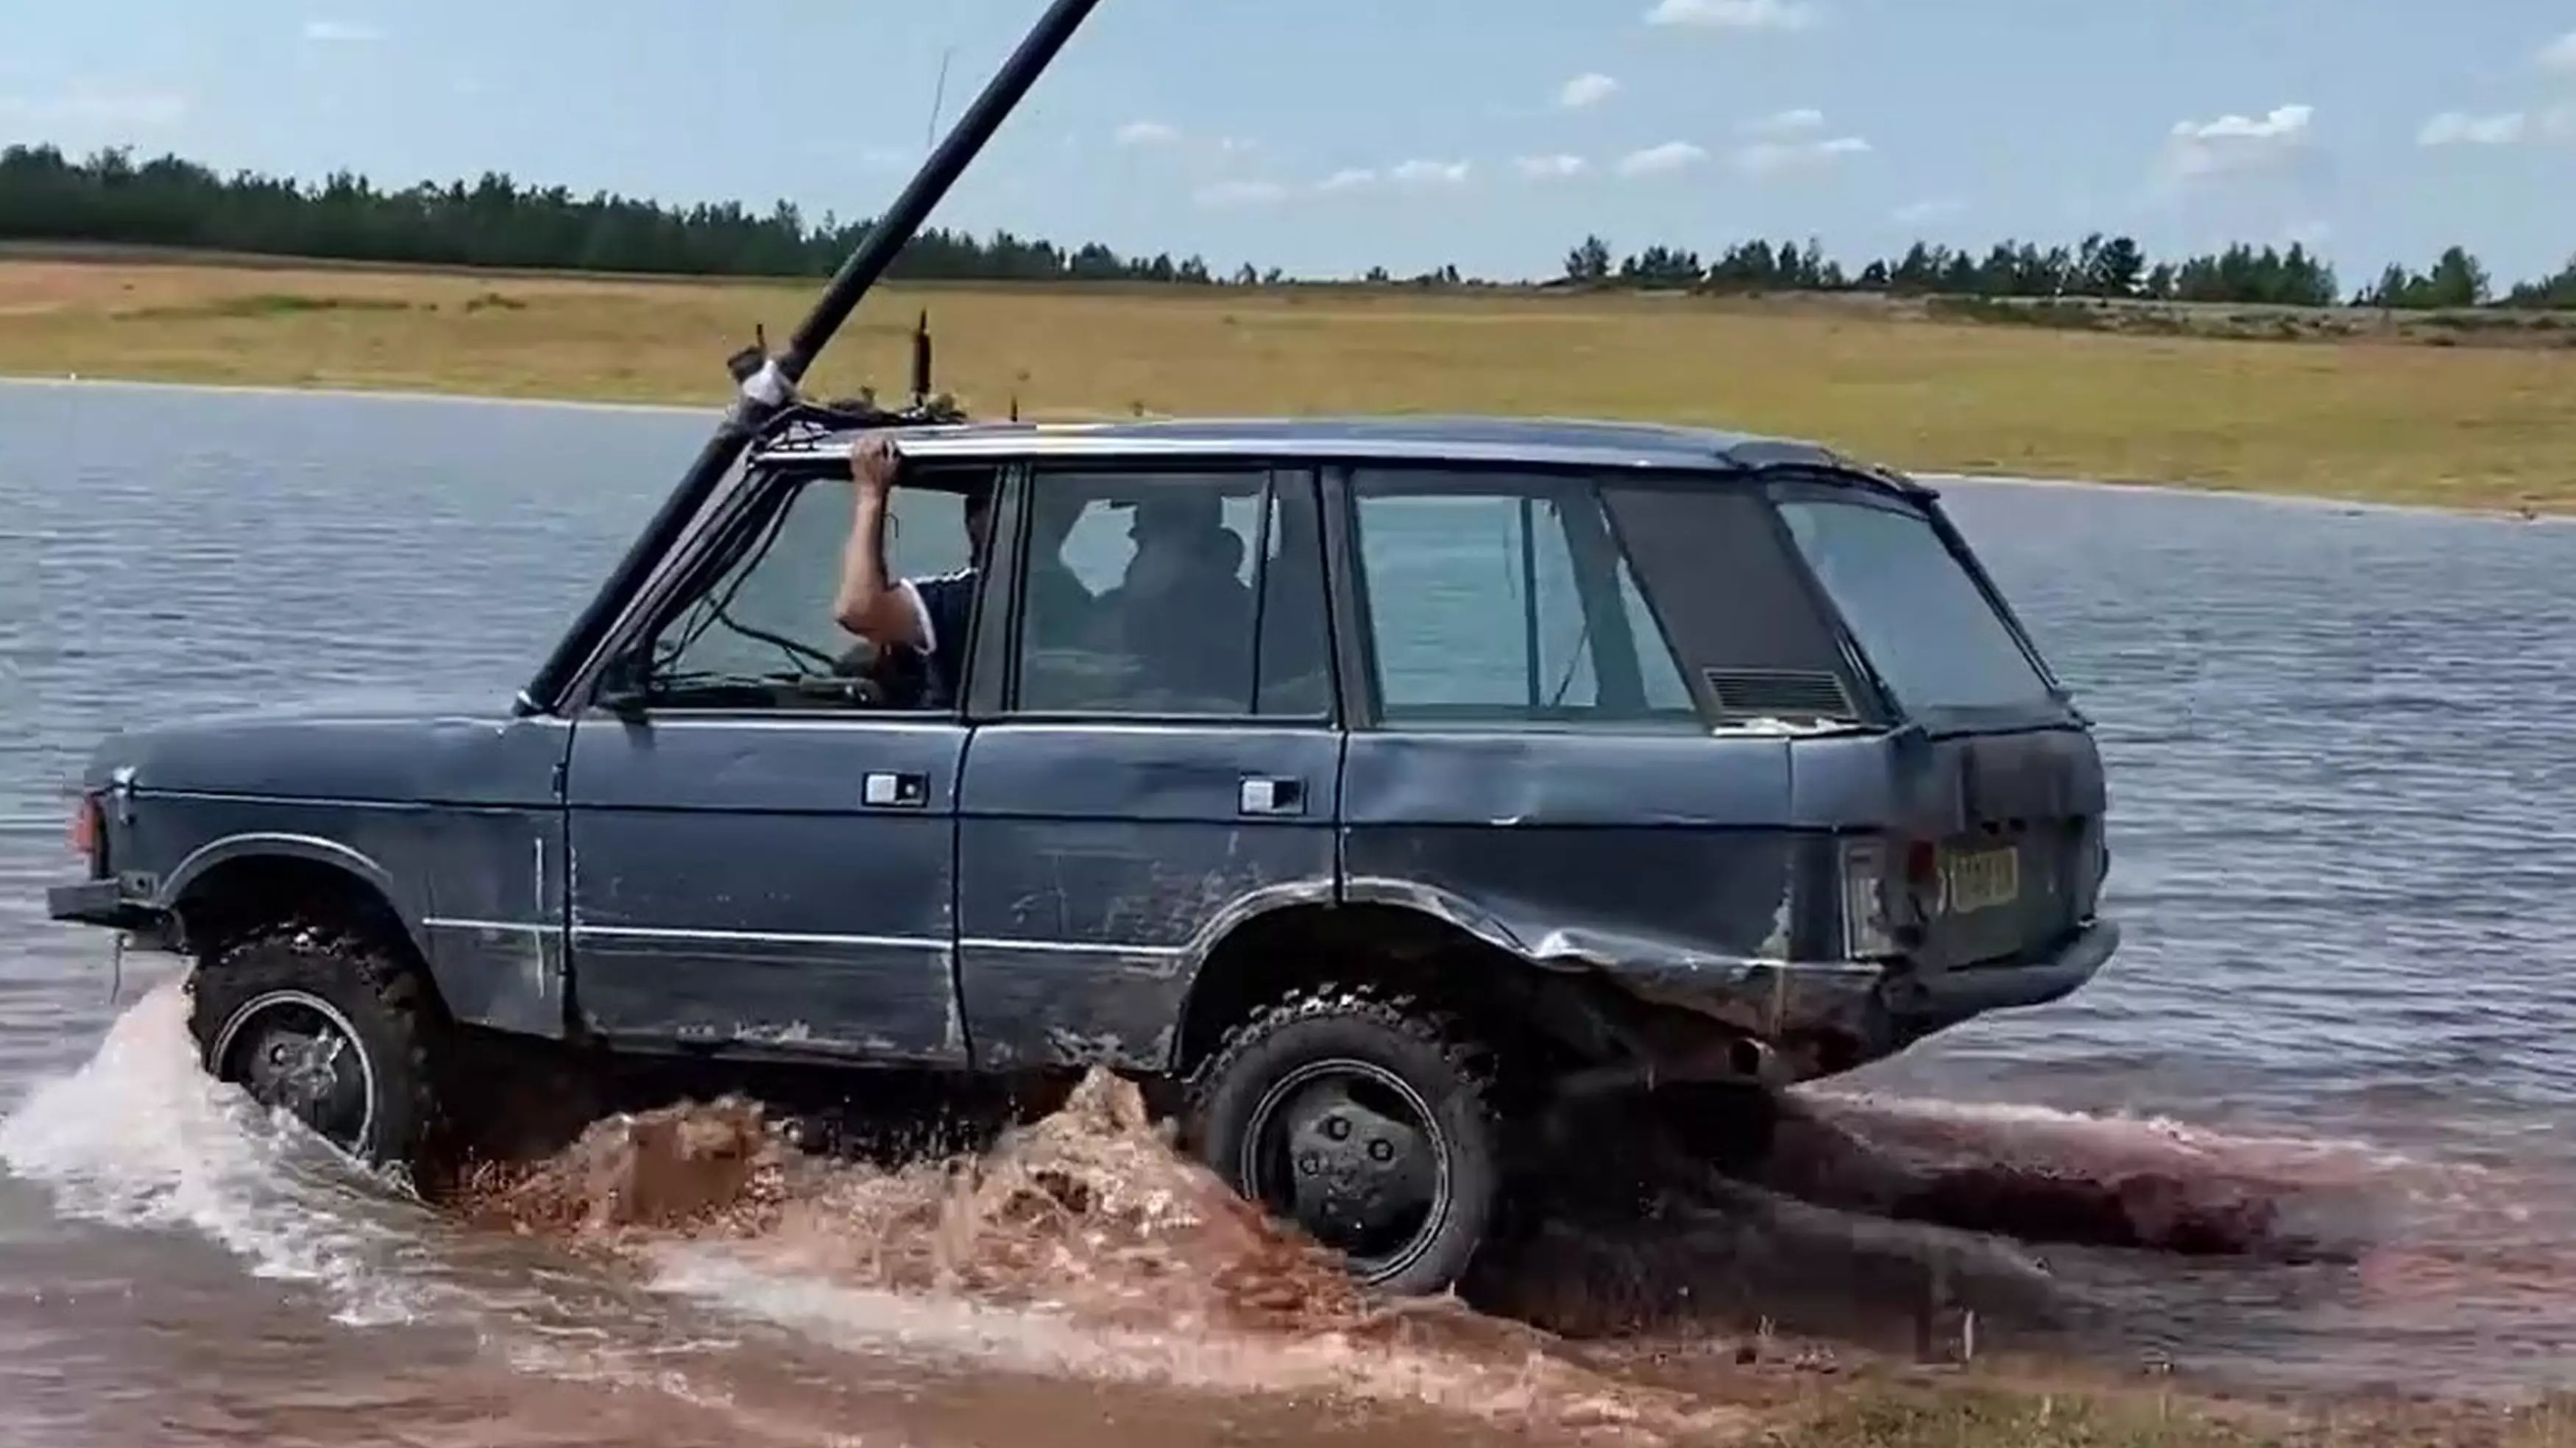 'Rural James Bond' Completely Submerges Old Range Rover While Driving Through Pond